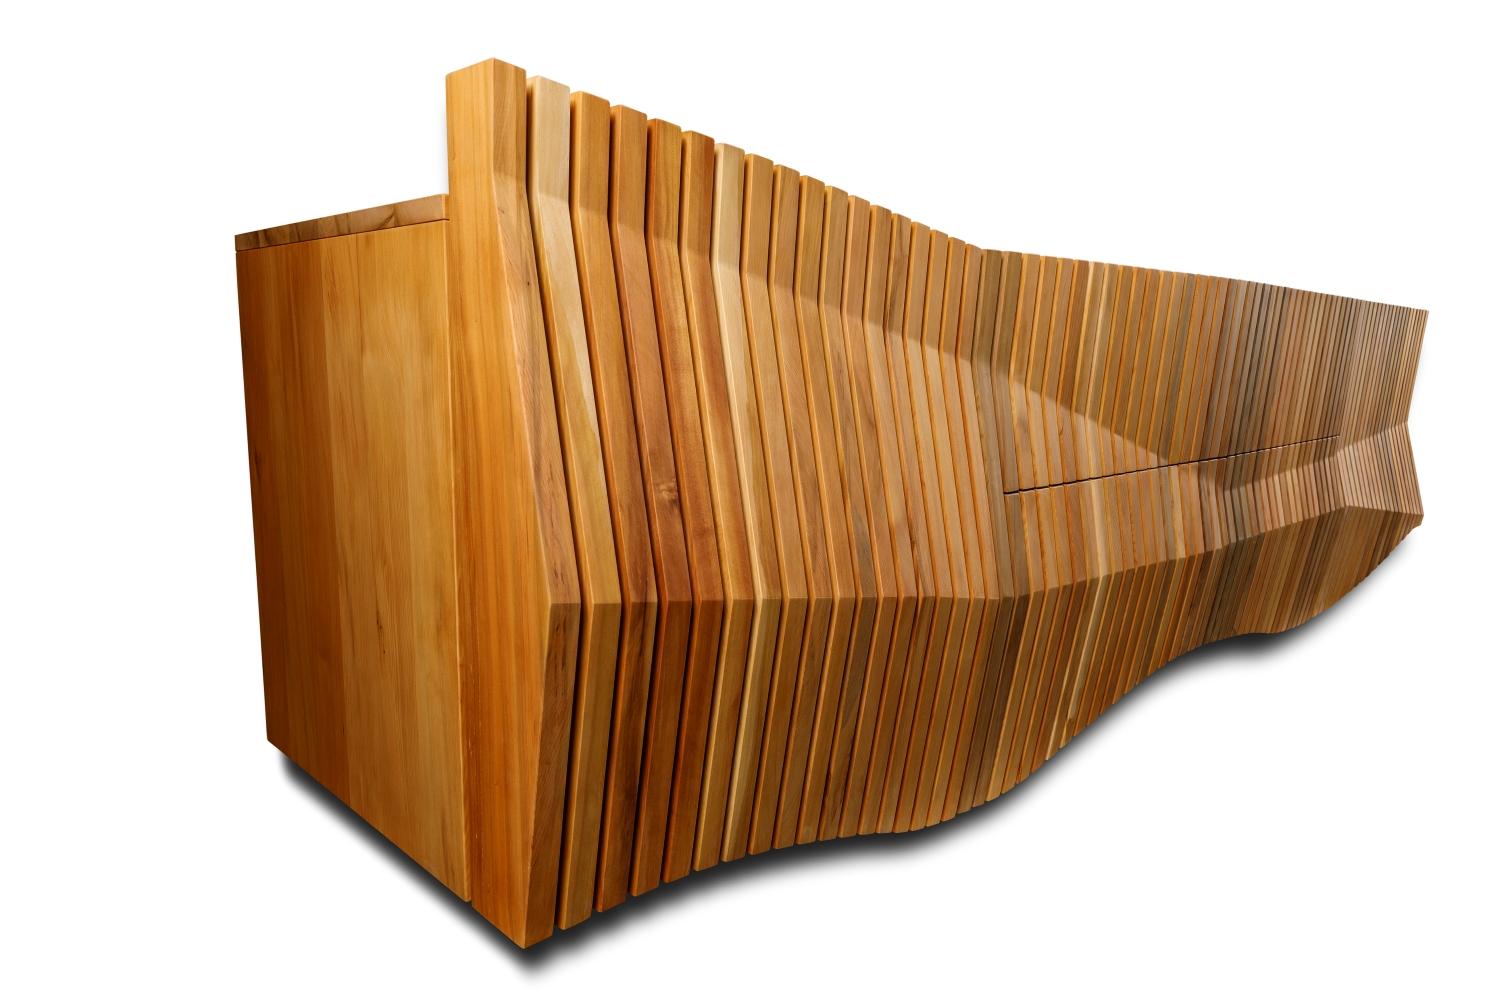 Hand-Crafted Nature Inspired Modern Organic Credenza Made from Sustainable River Rescued Wood For Sale